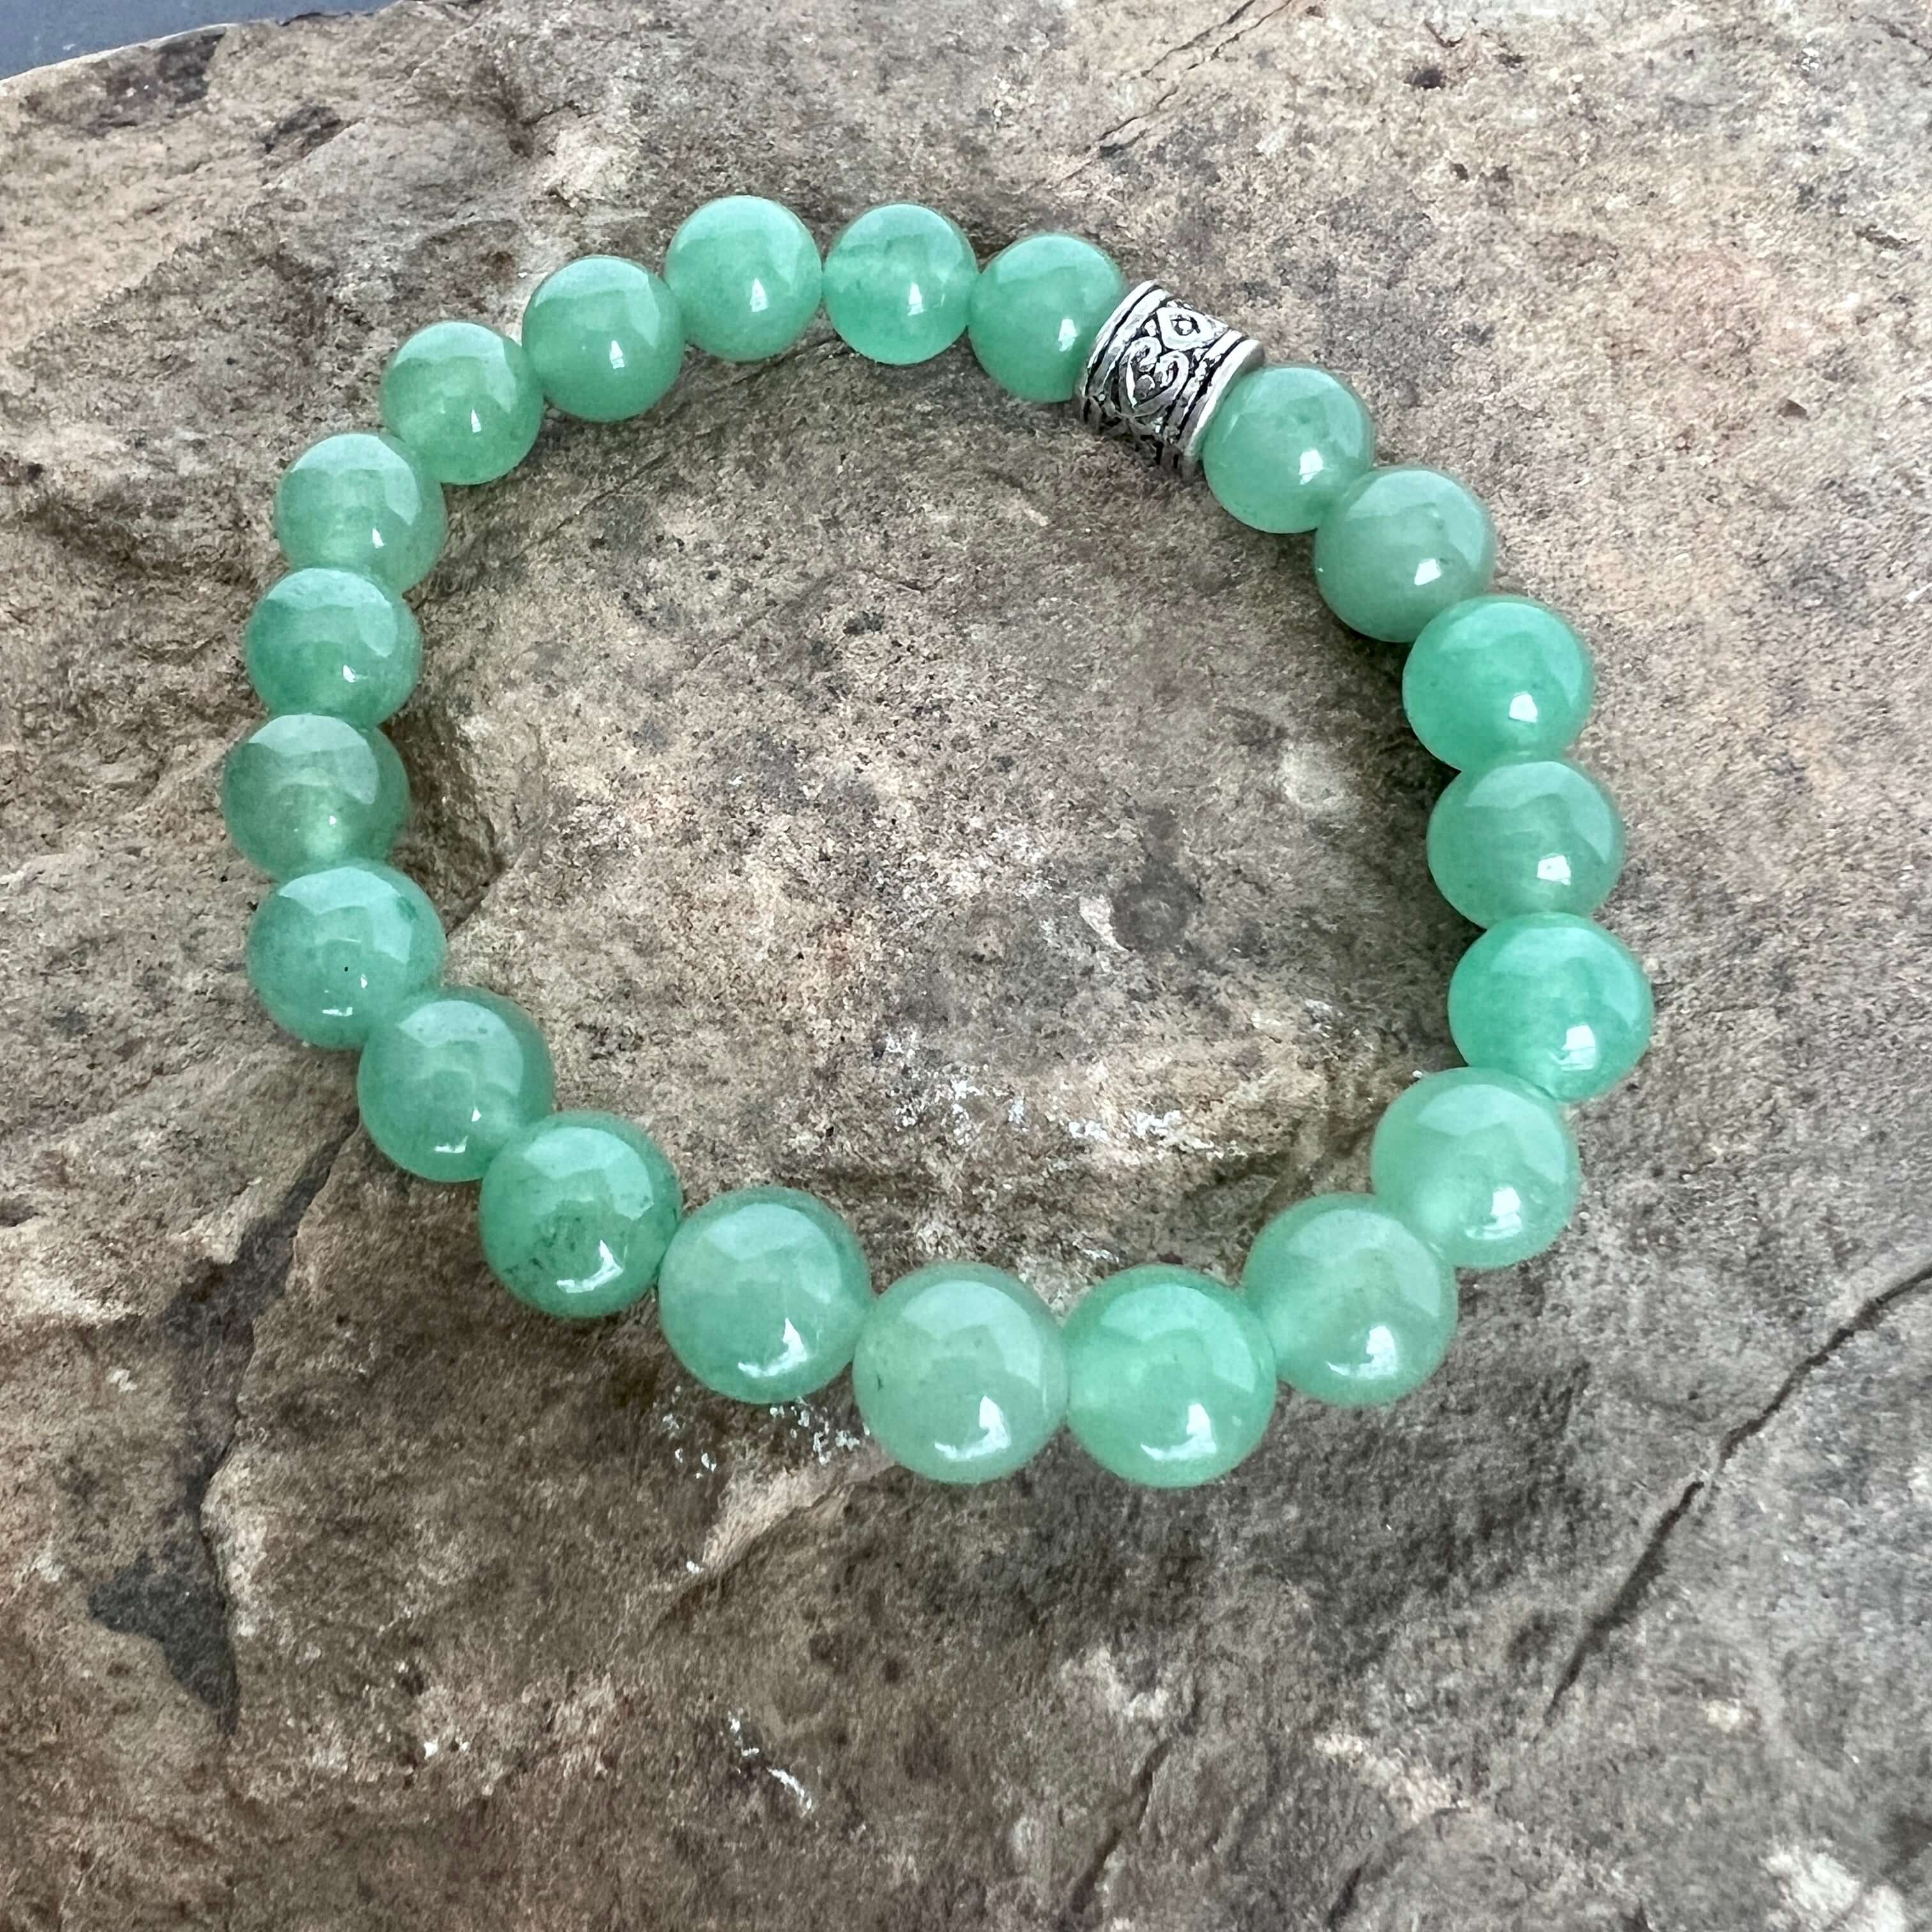 Green Aventurine Bead Bracelet This bracelet is made with high-quality Green Aventurine stones which bring comfort and protection to the wearer. Zodiac Signs: Virgo and Taurus. Chakra: Heart. Handmade with authentic crystals and gemstones in Minneapolis,